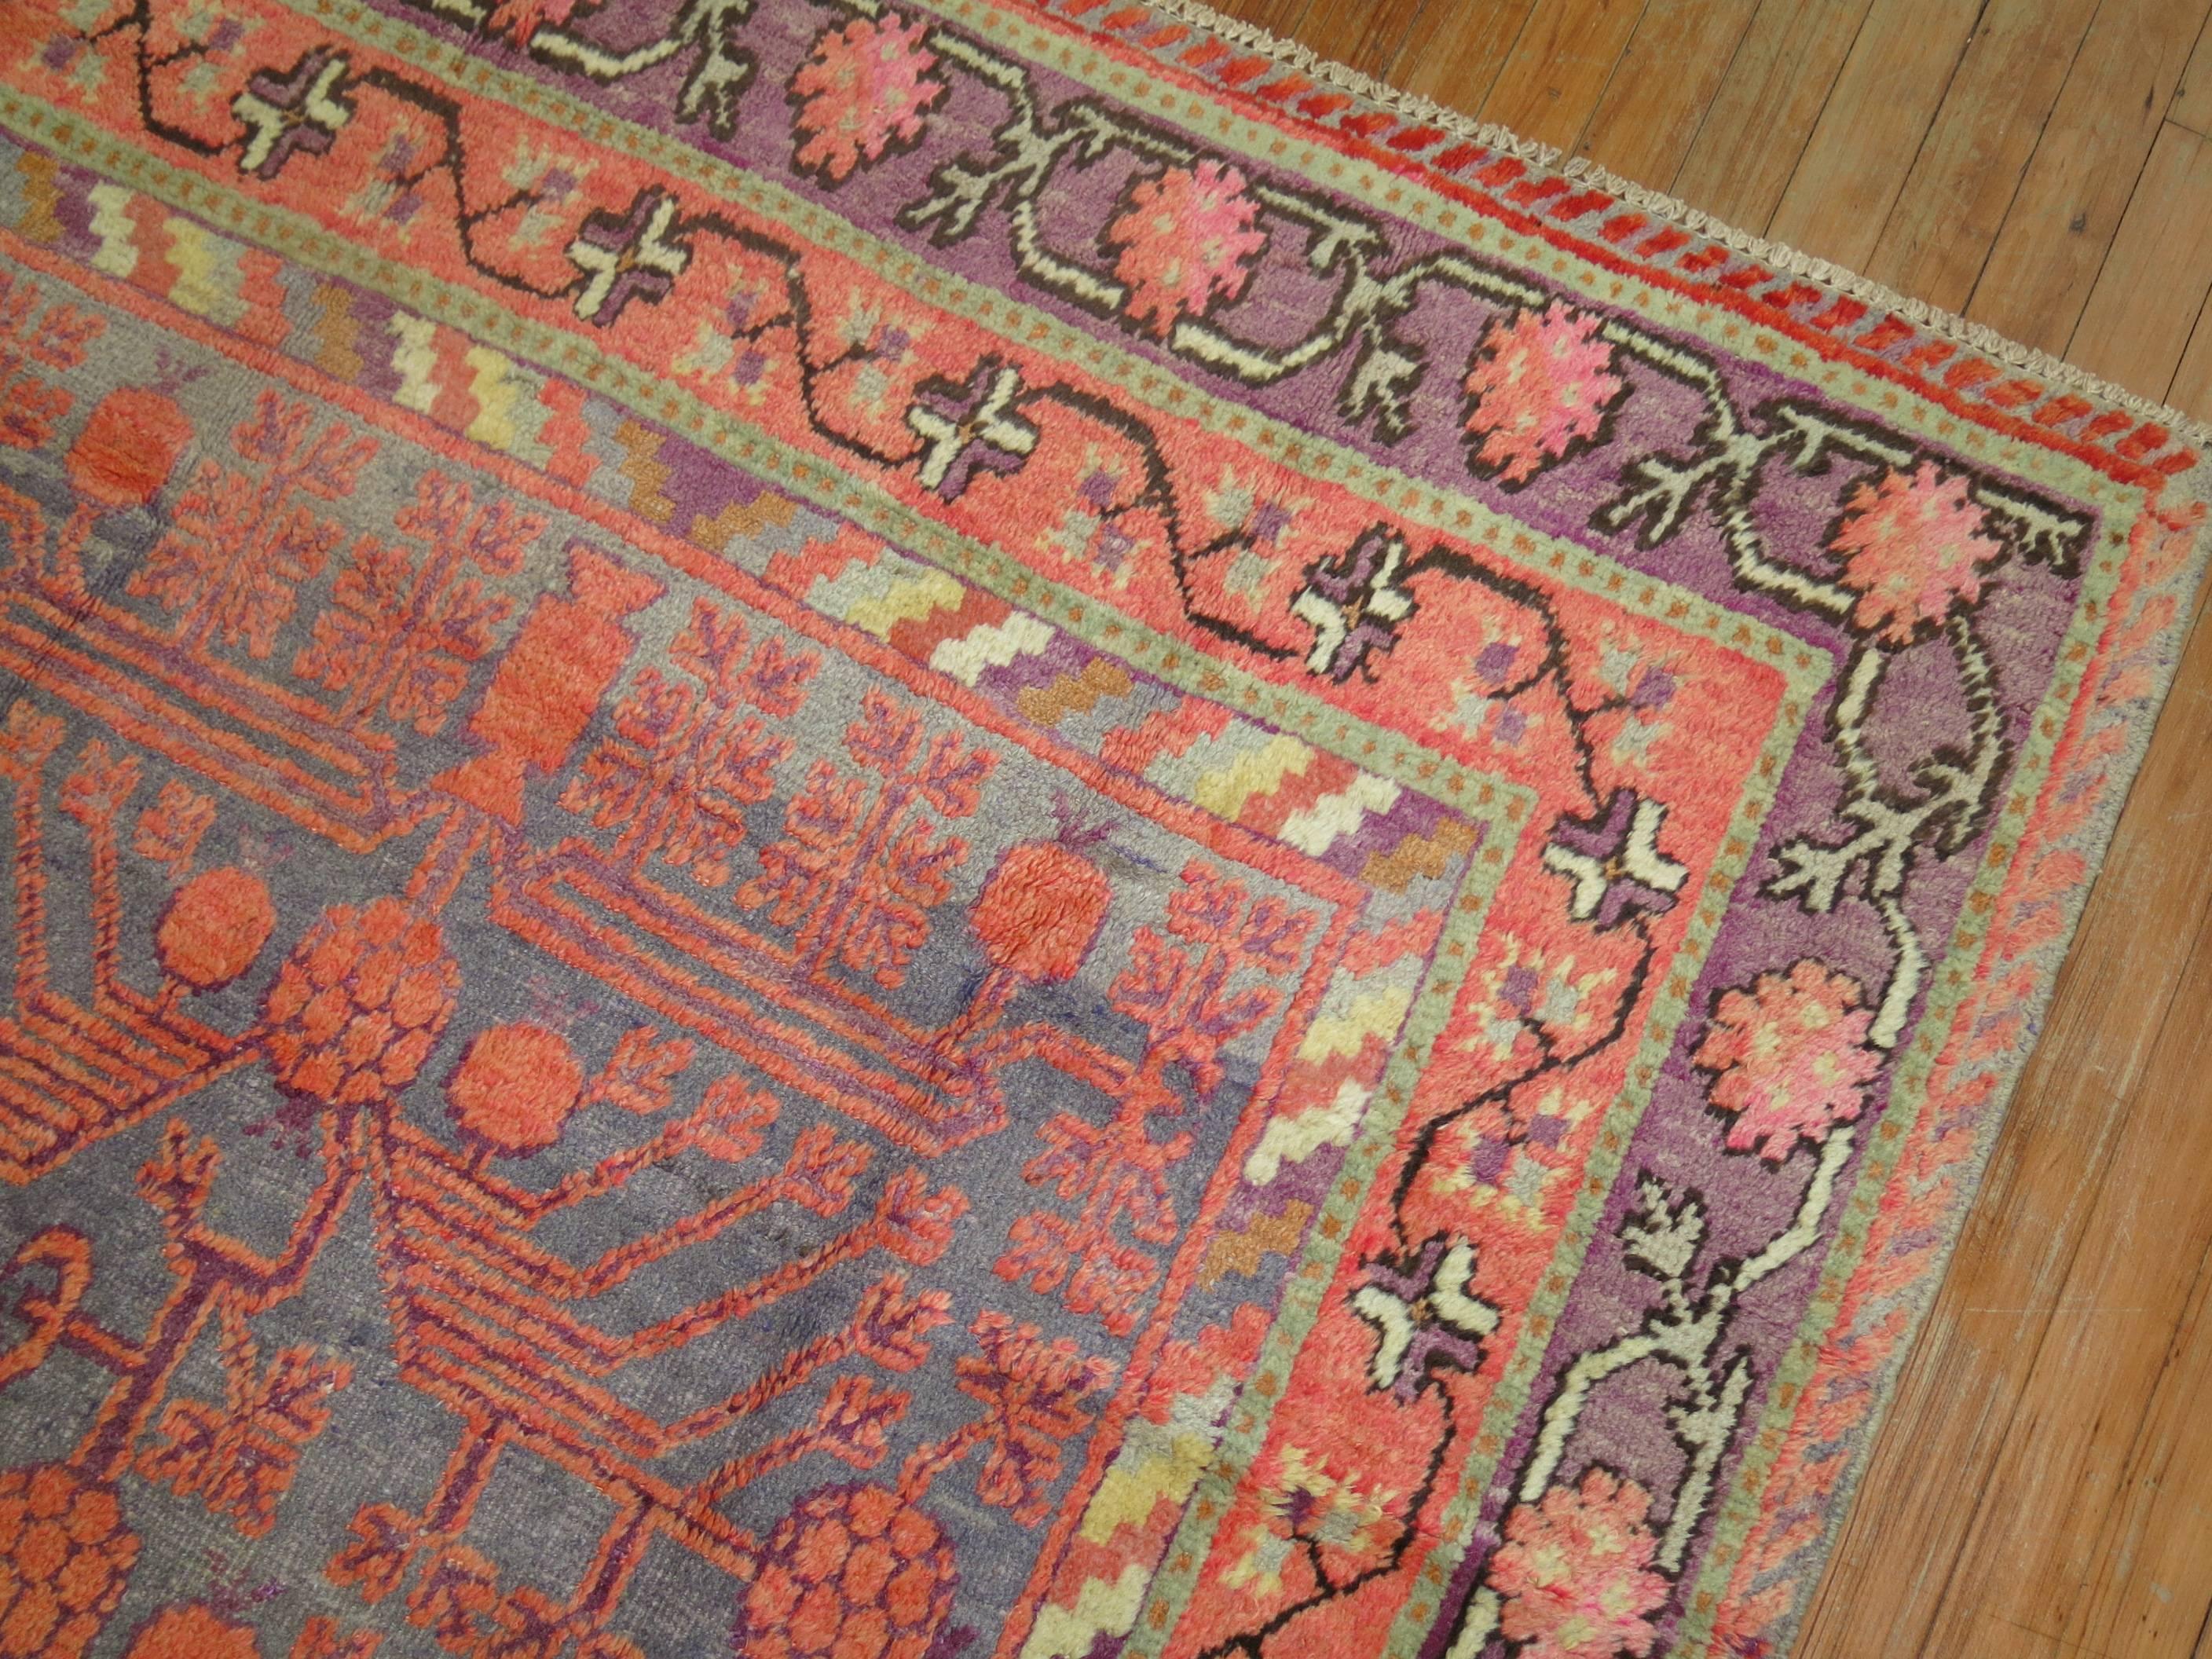 Stunning early 20th century Khotan rug with Classic pomegranate design surrounded by a floral border. Gray ground , dominant accents in coral and purple.
Even Medium Pile throughout. This piece isnt worn or flat like some Khotans. The pile is